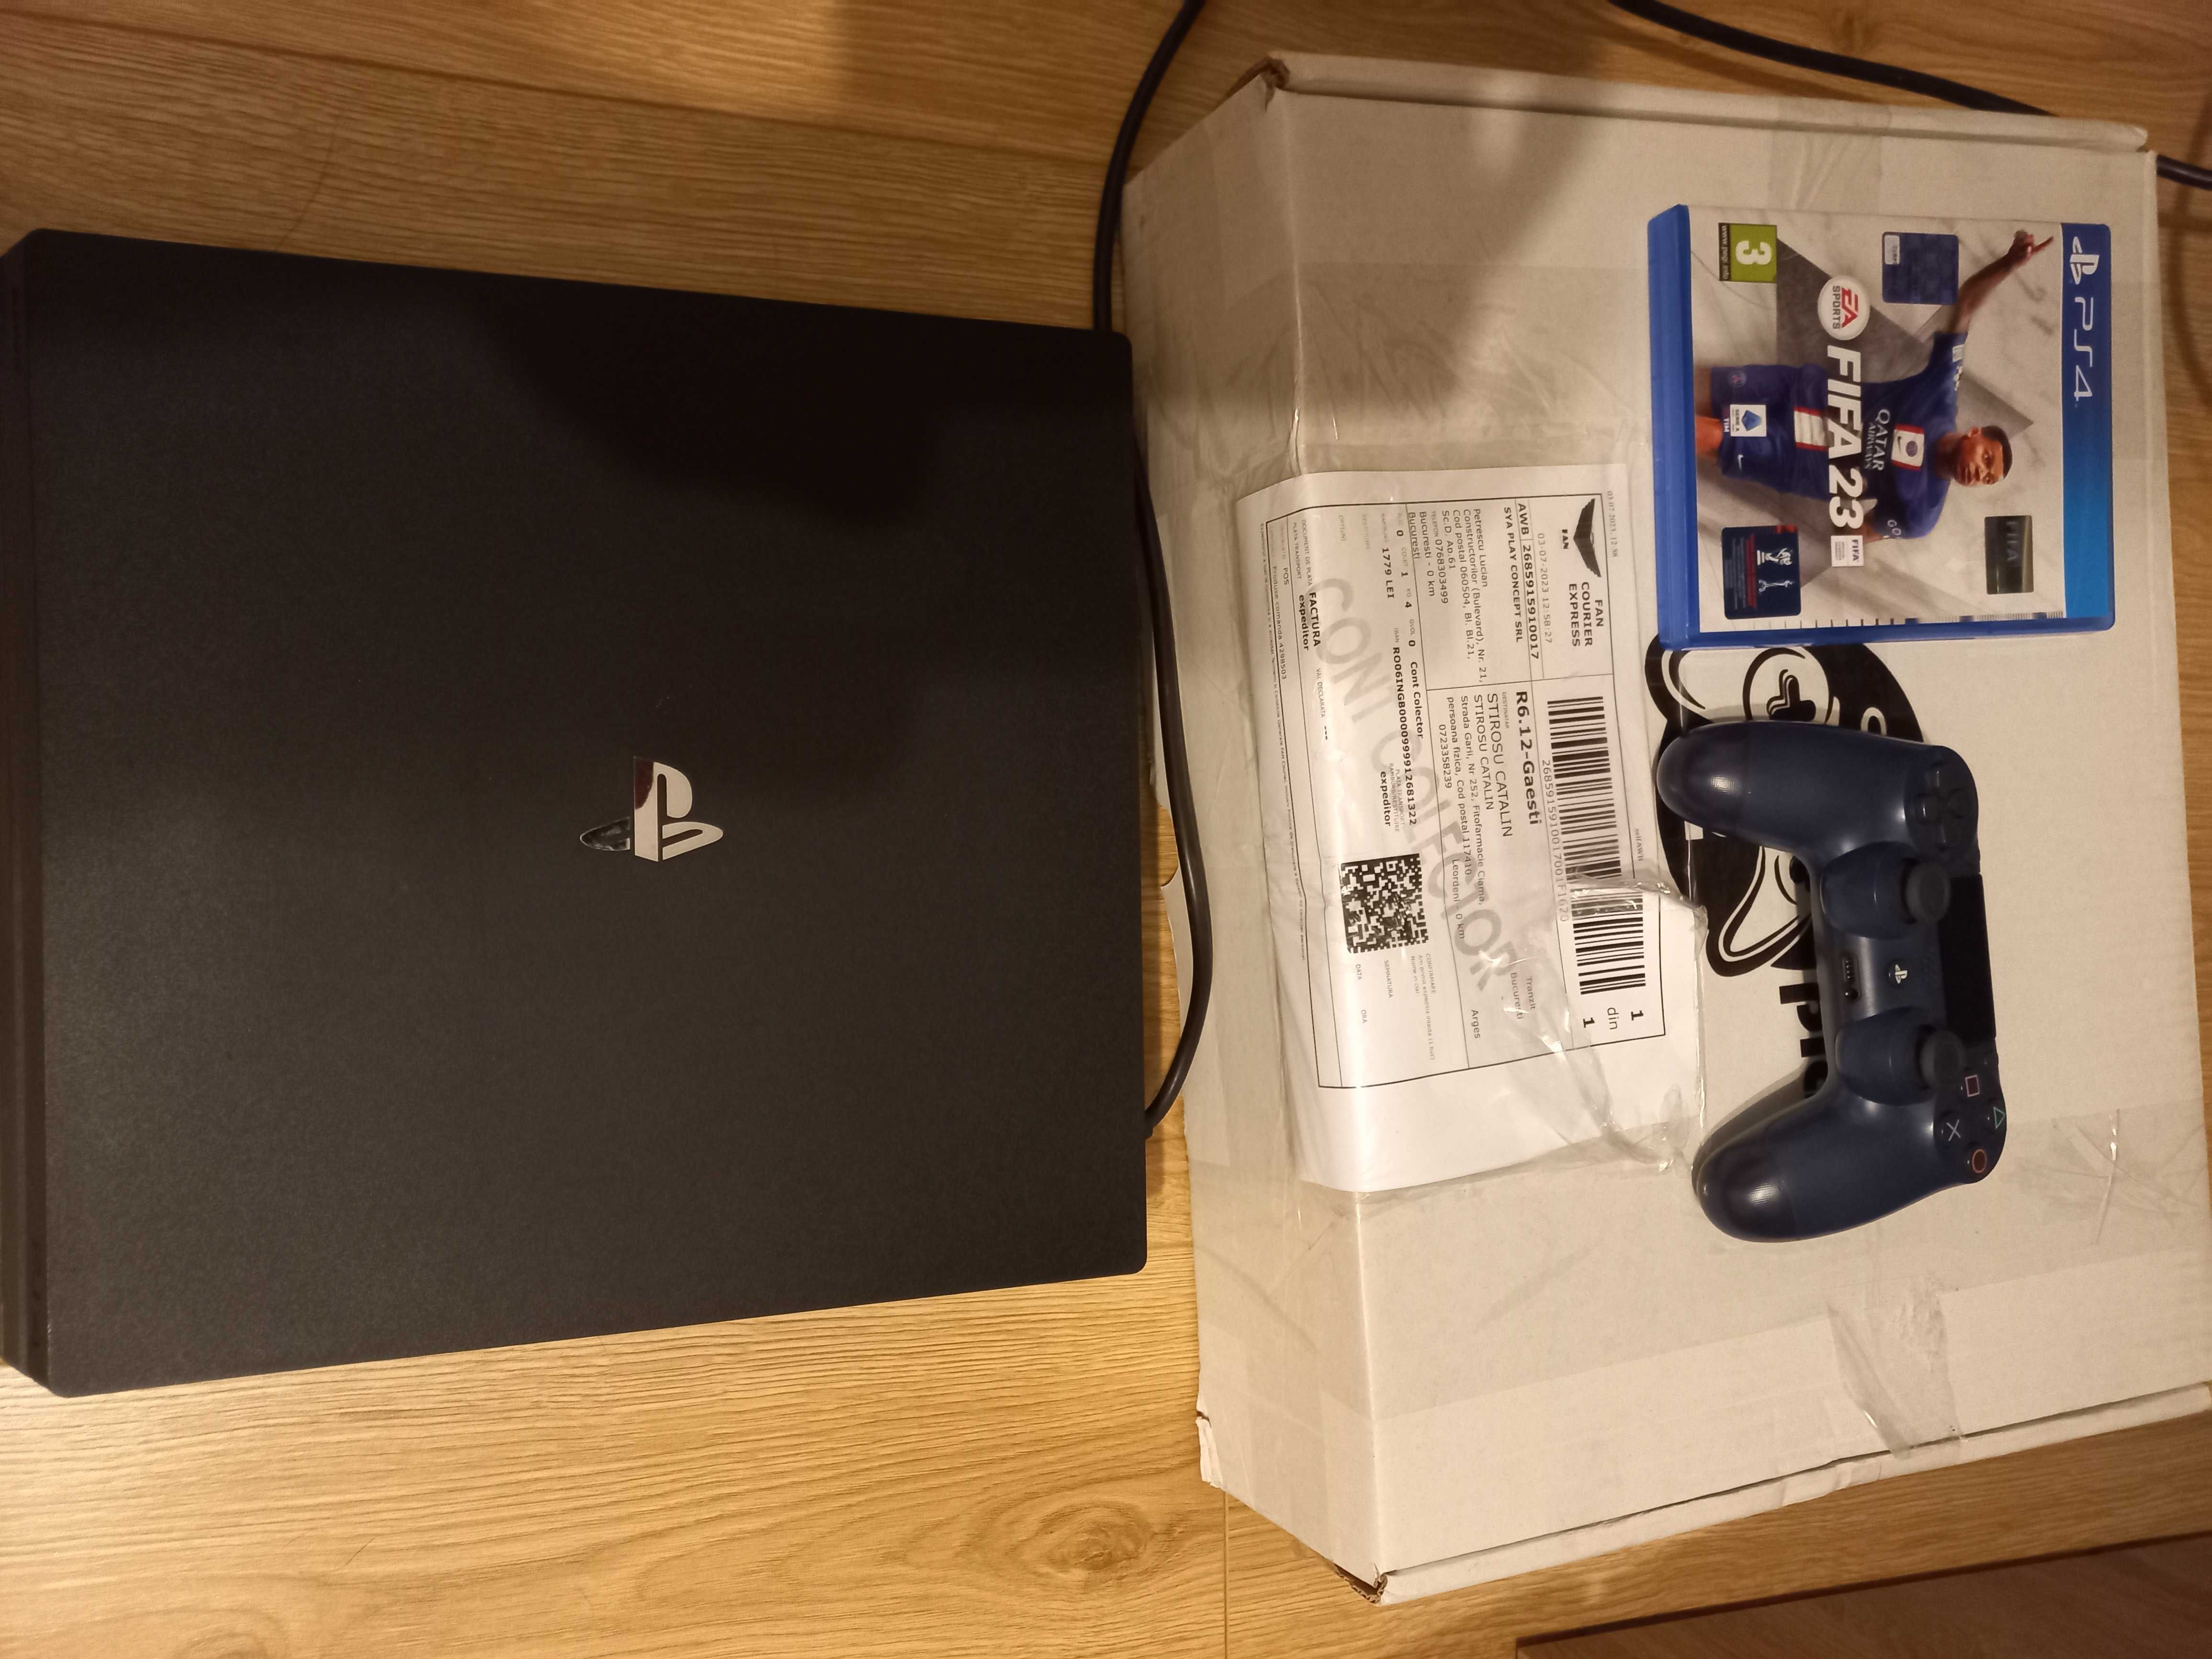 Consola Sony PlayStation 4 PRO PS4 1TB + Controller + FIFA 23